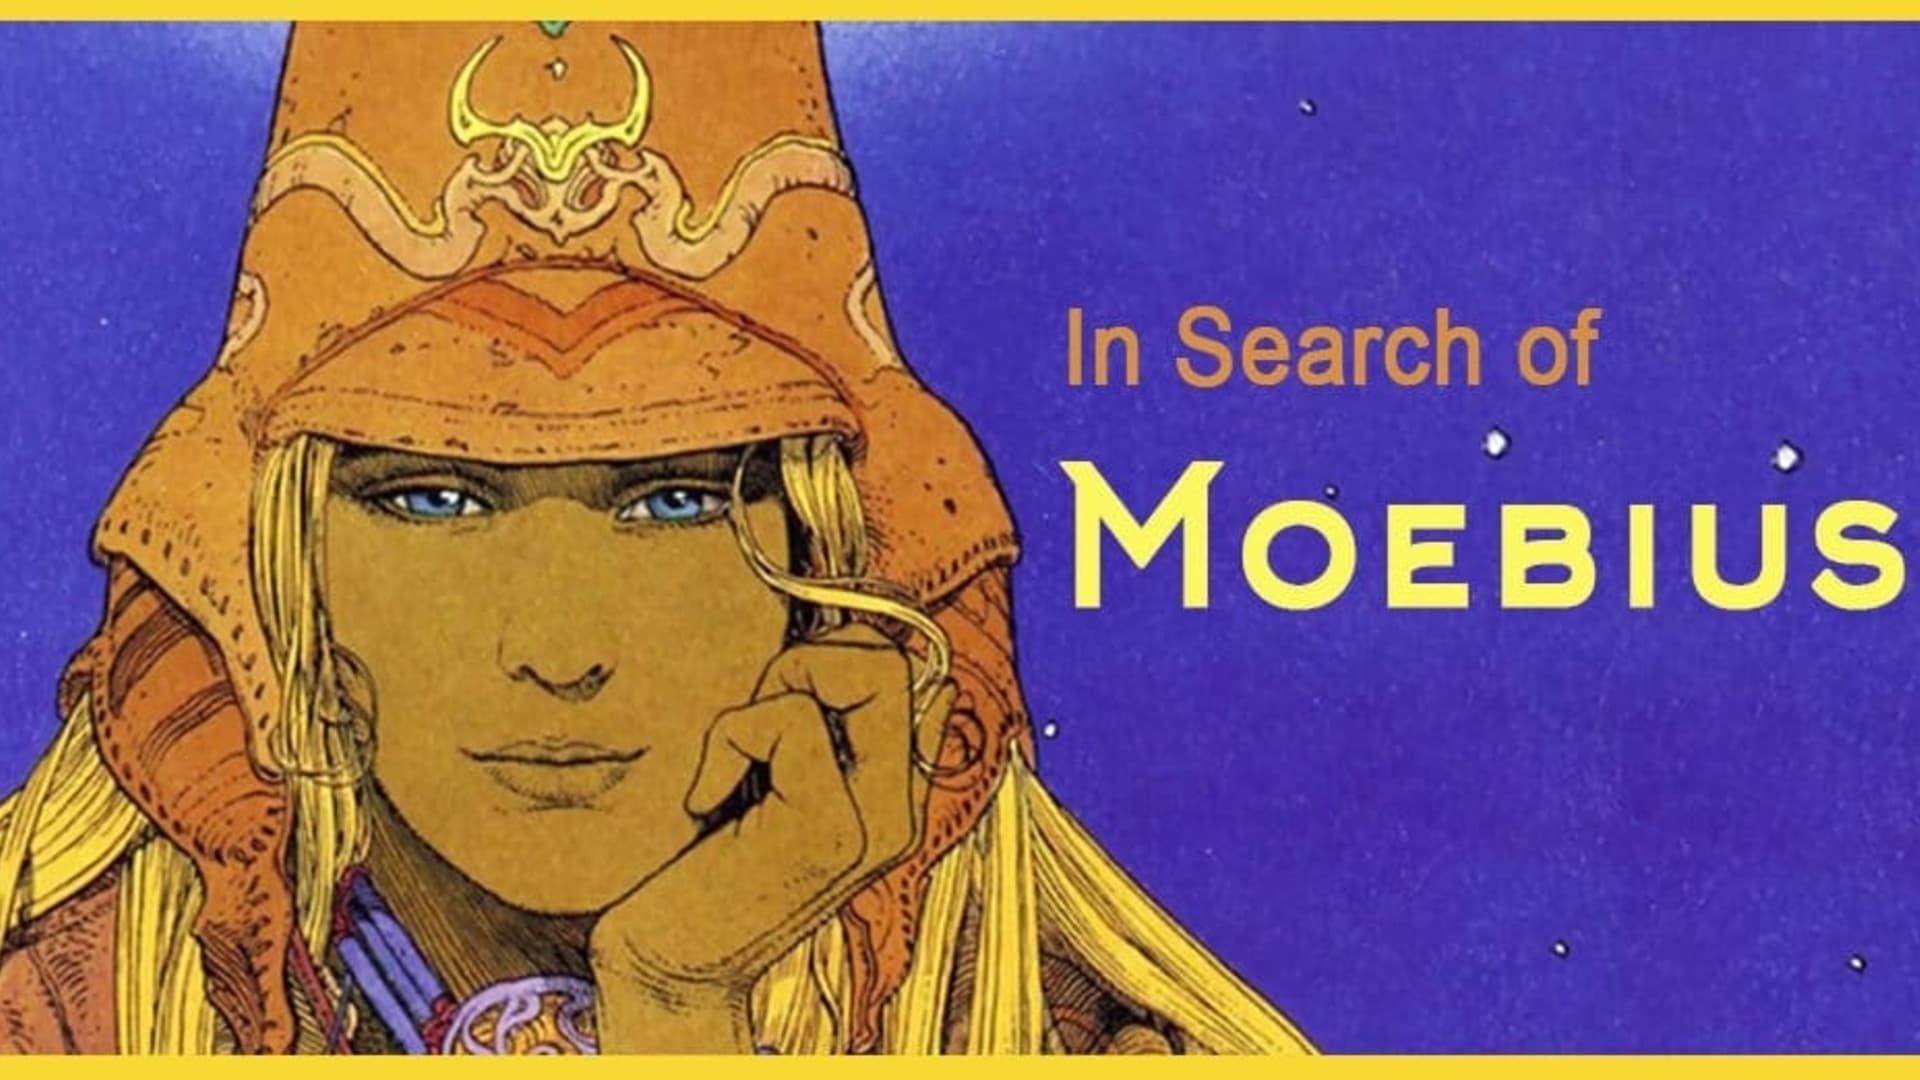 In Search of Moebius (2007)